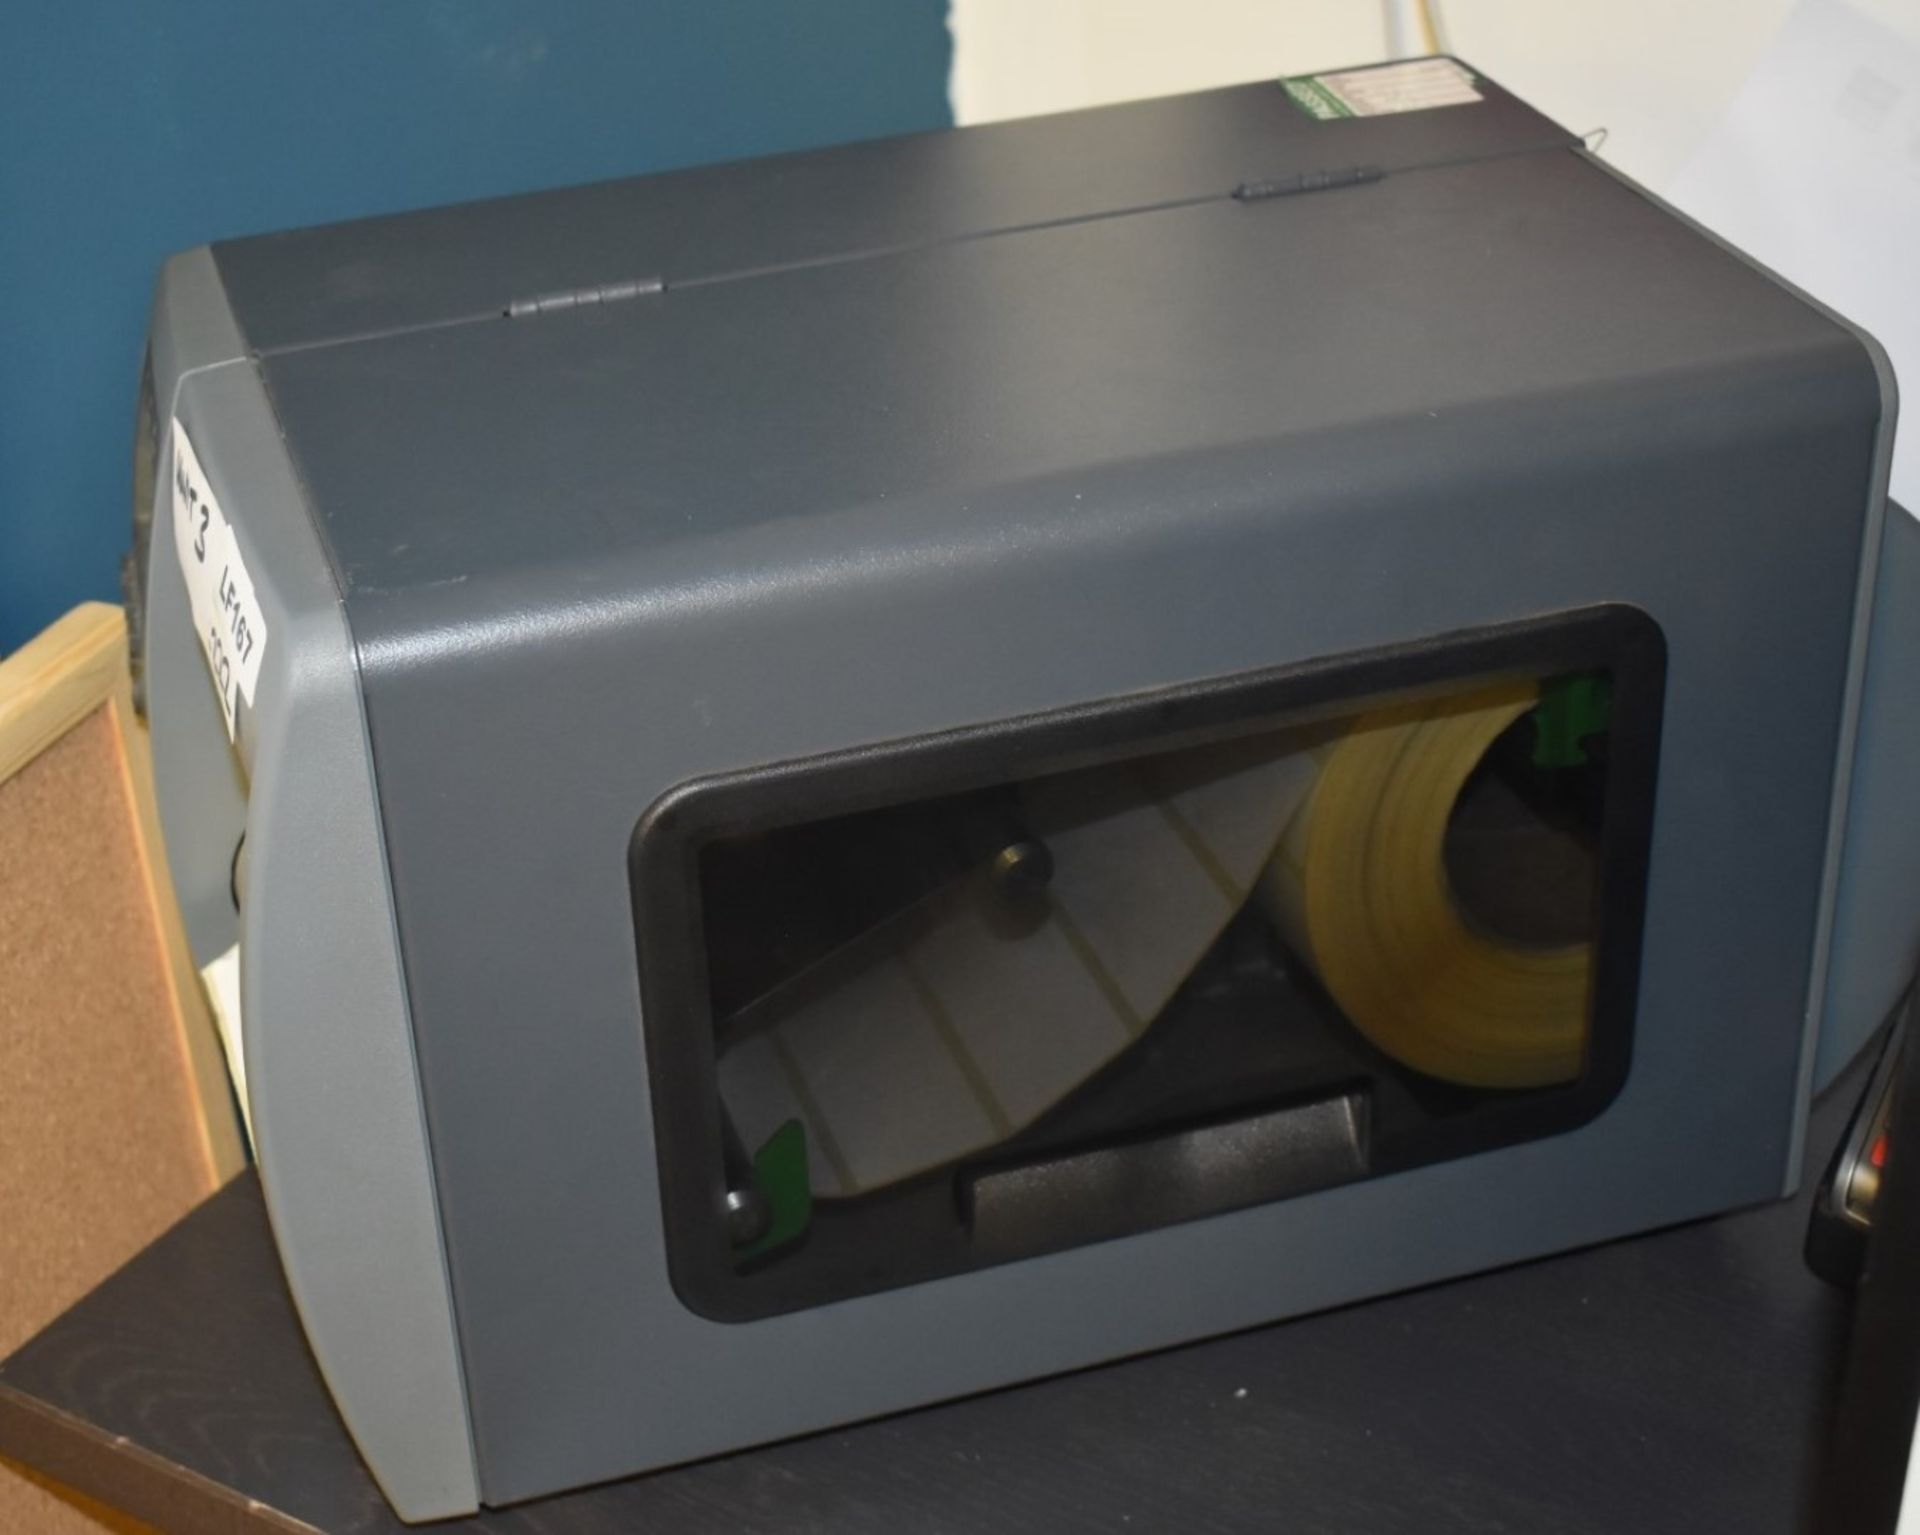 1 x Datamax O'Neil M-Class Mark II Industrial Thermal Label Printer With USB Connectivity - Includes - Image 3 of 4